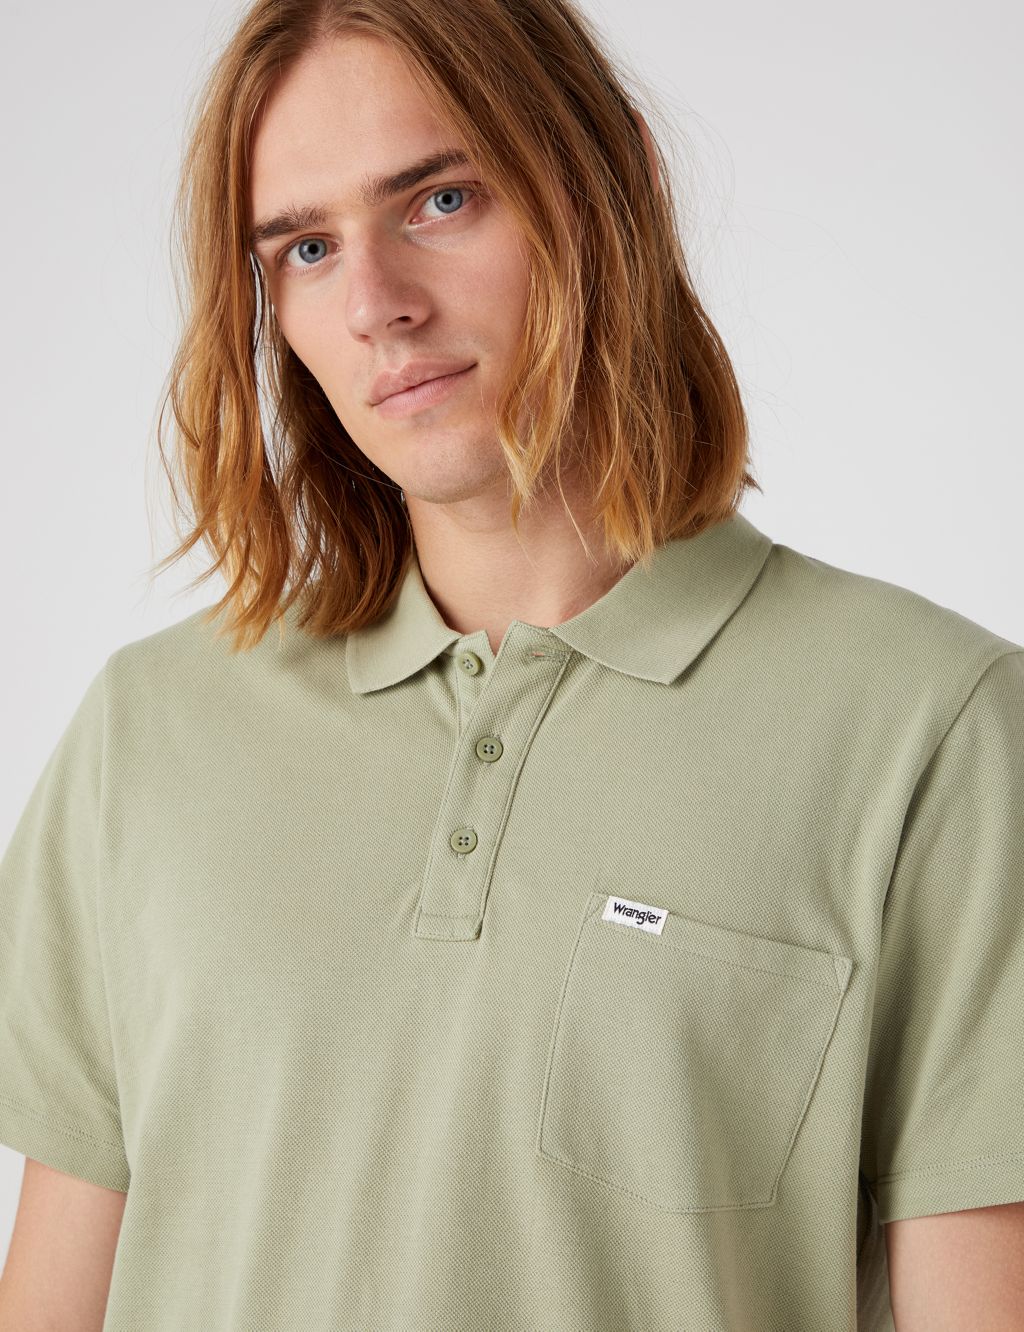 Relaxed Fit Pure Cotton Polo Shirt image 5